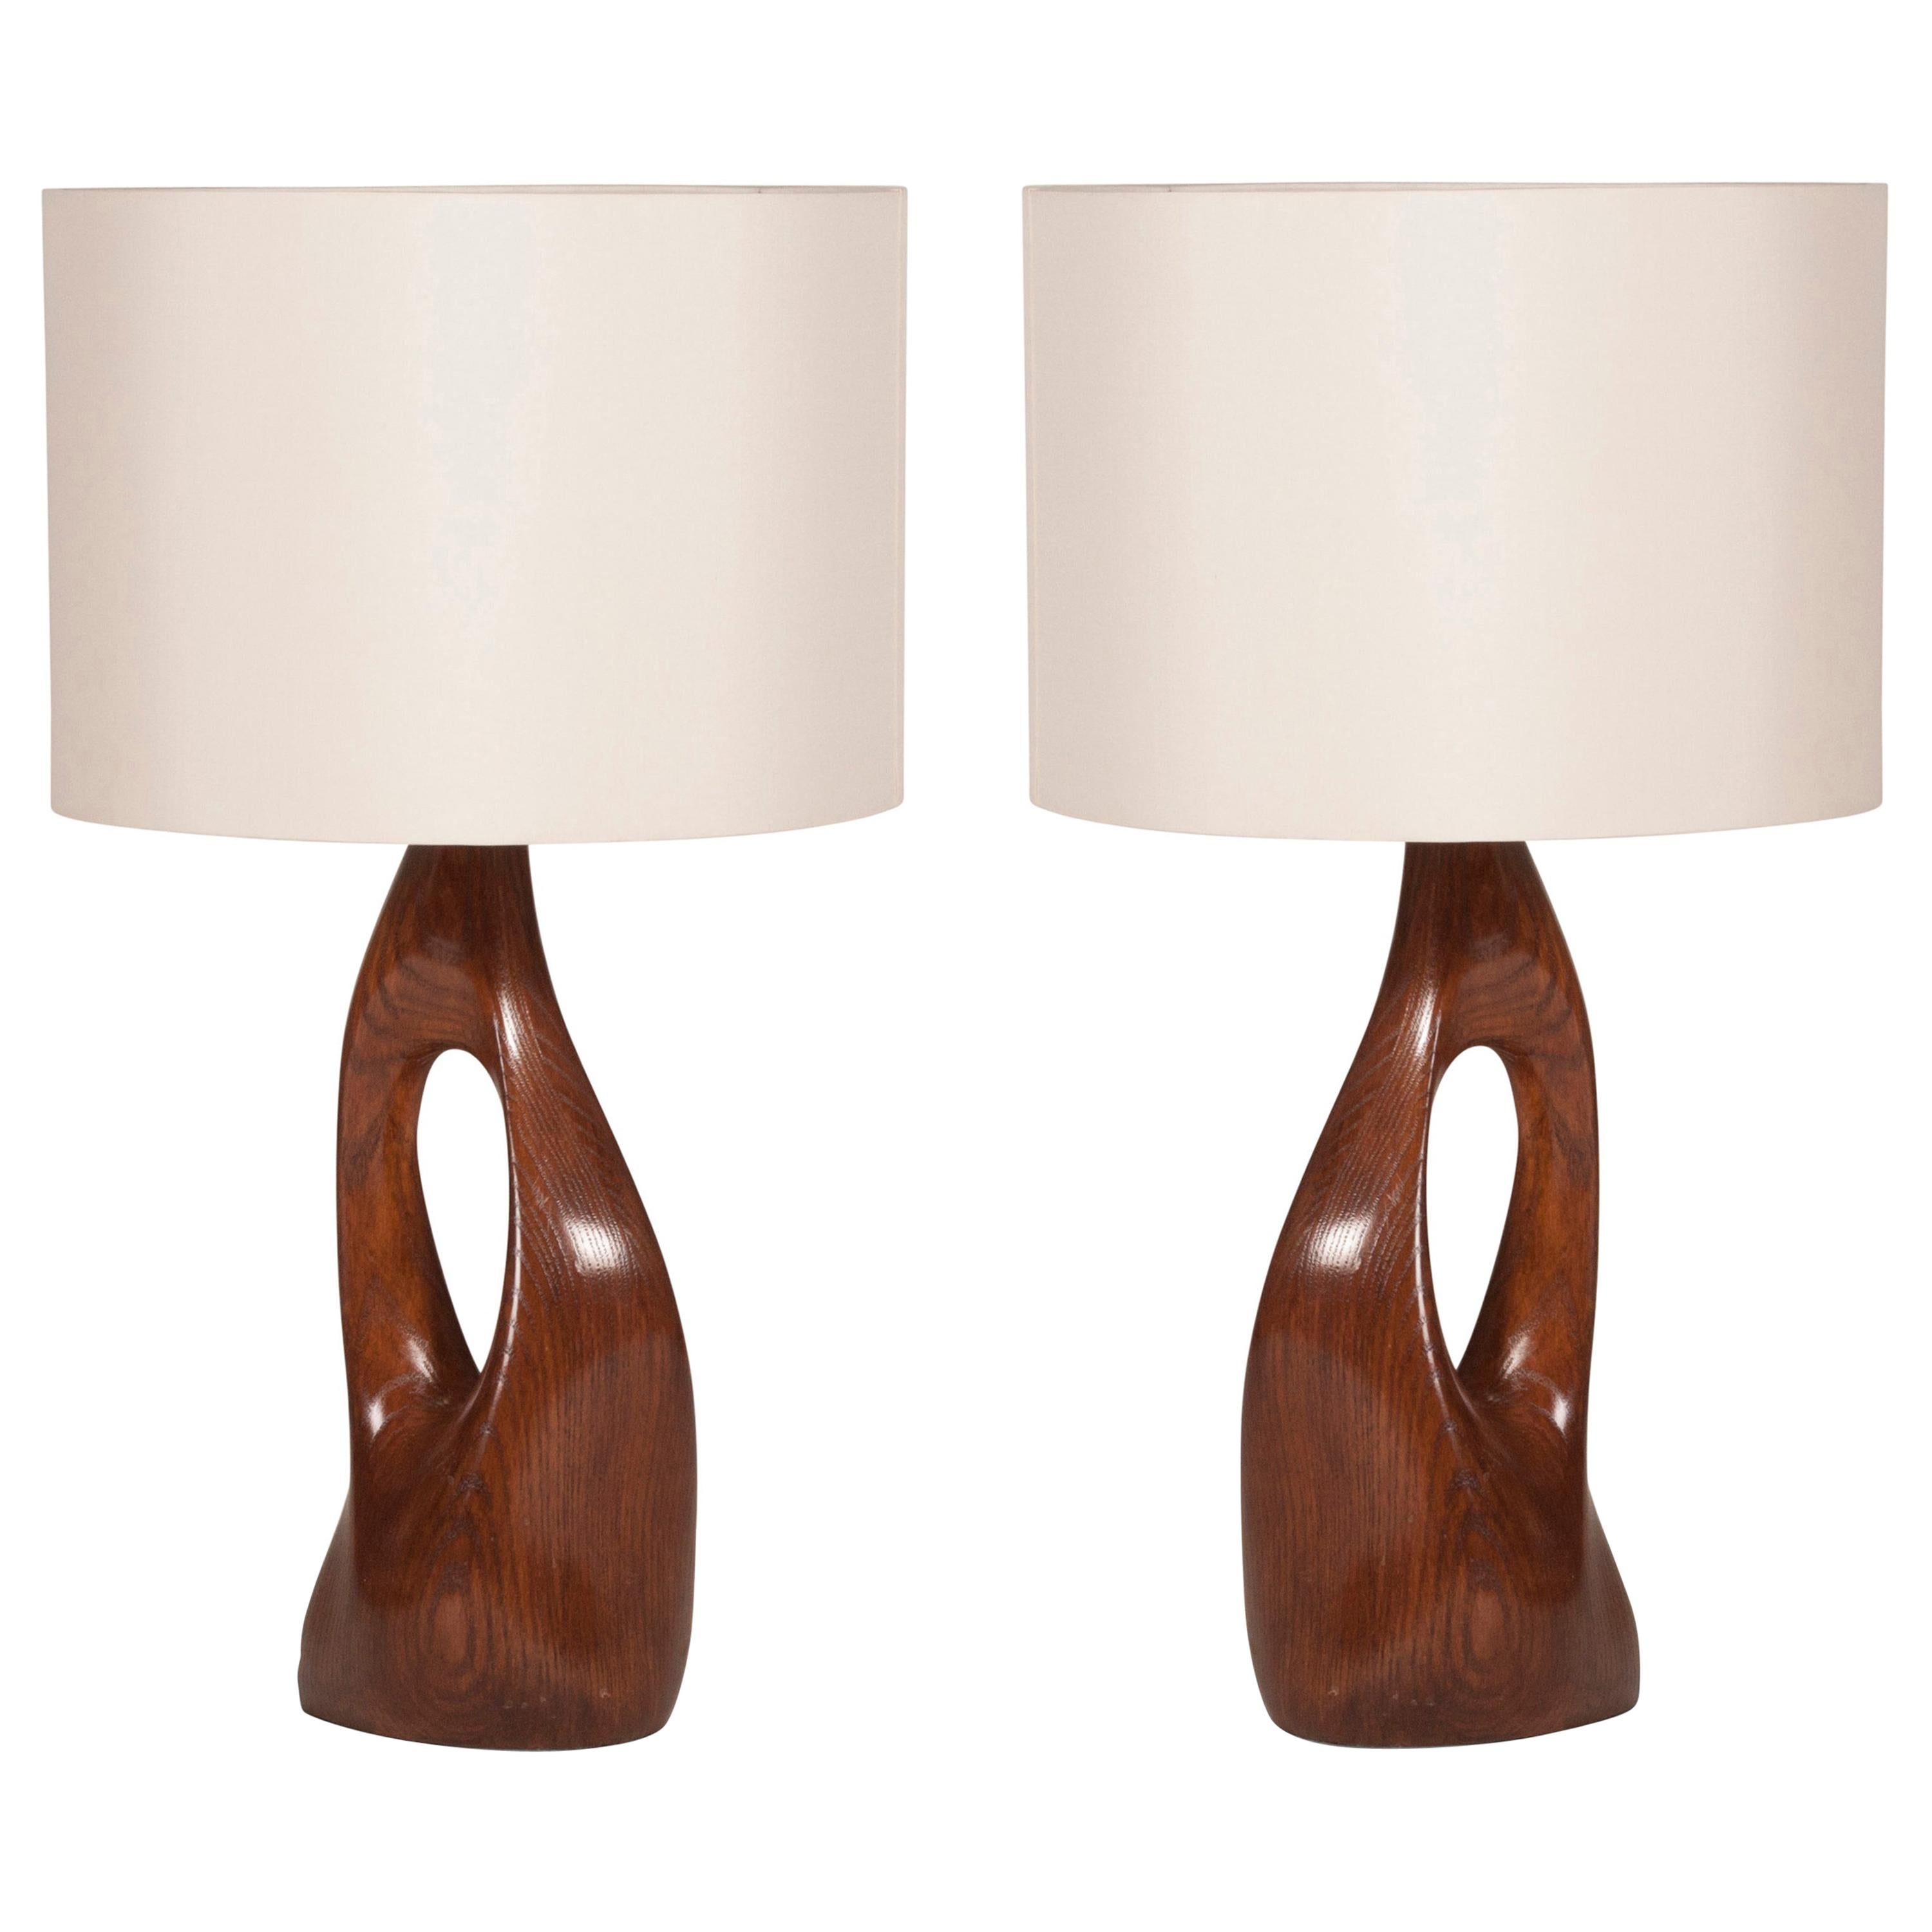 Amorph Helix Table Lamp, Solid Wood, Walnut Finish with Ivory Silk Shade